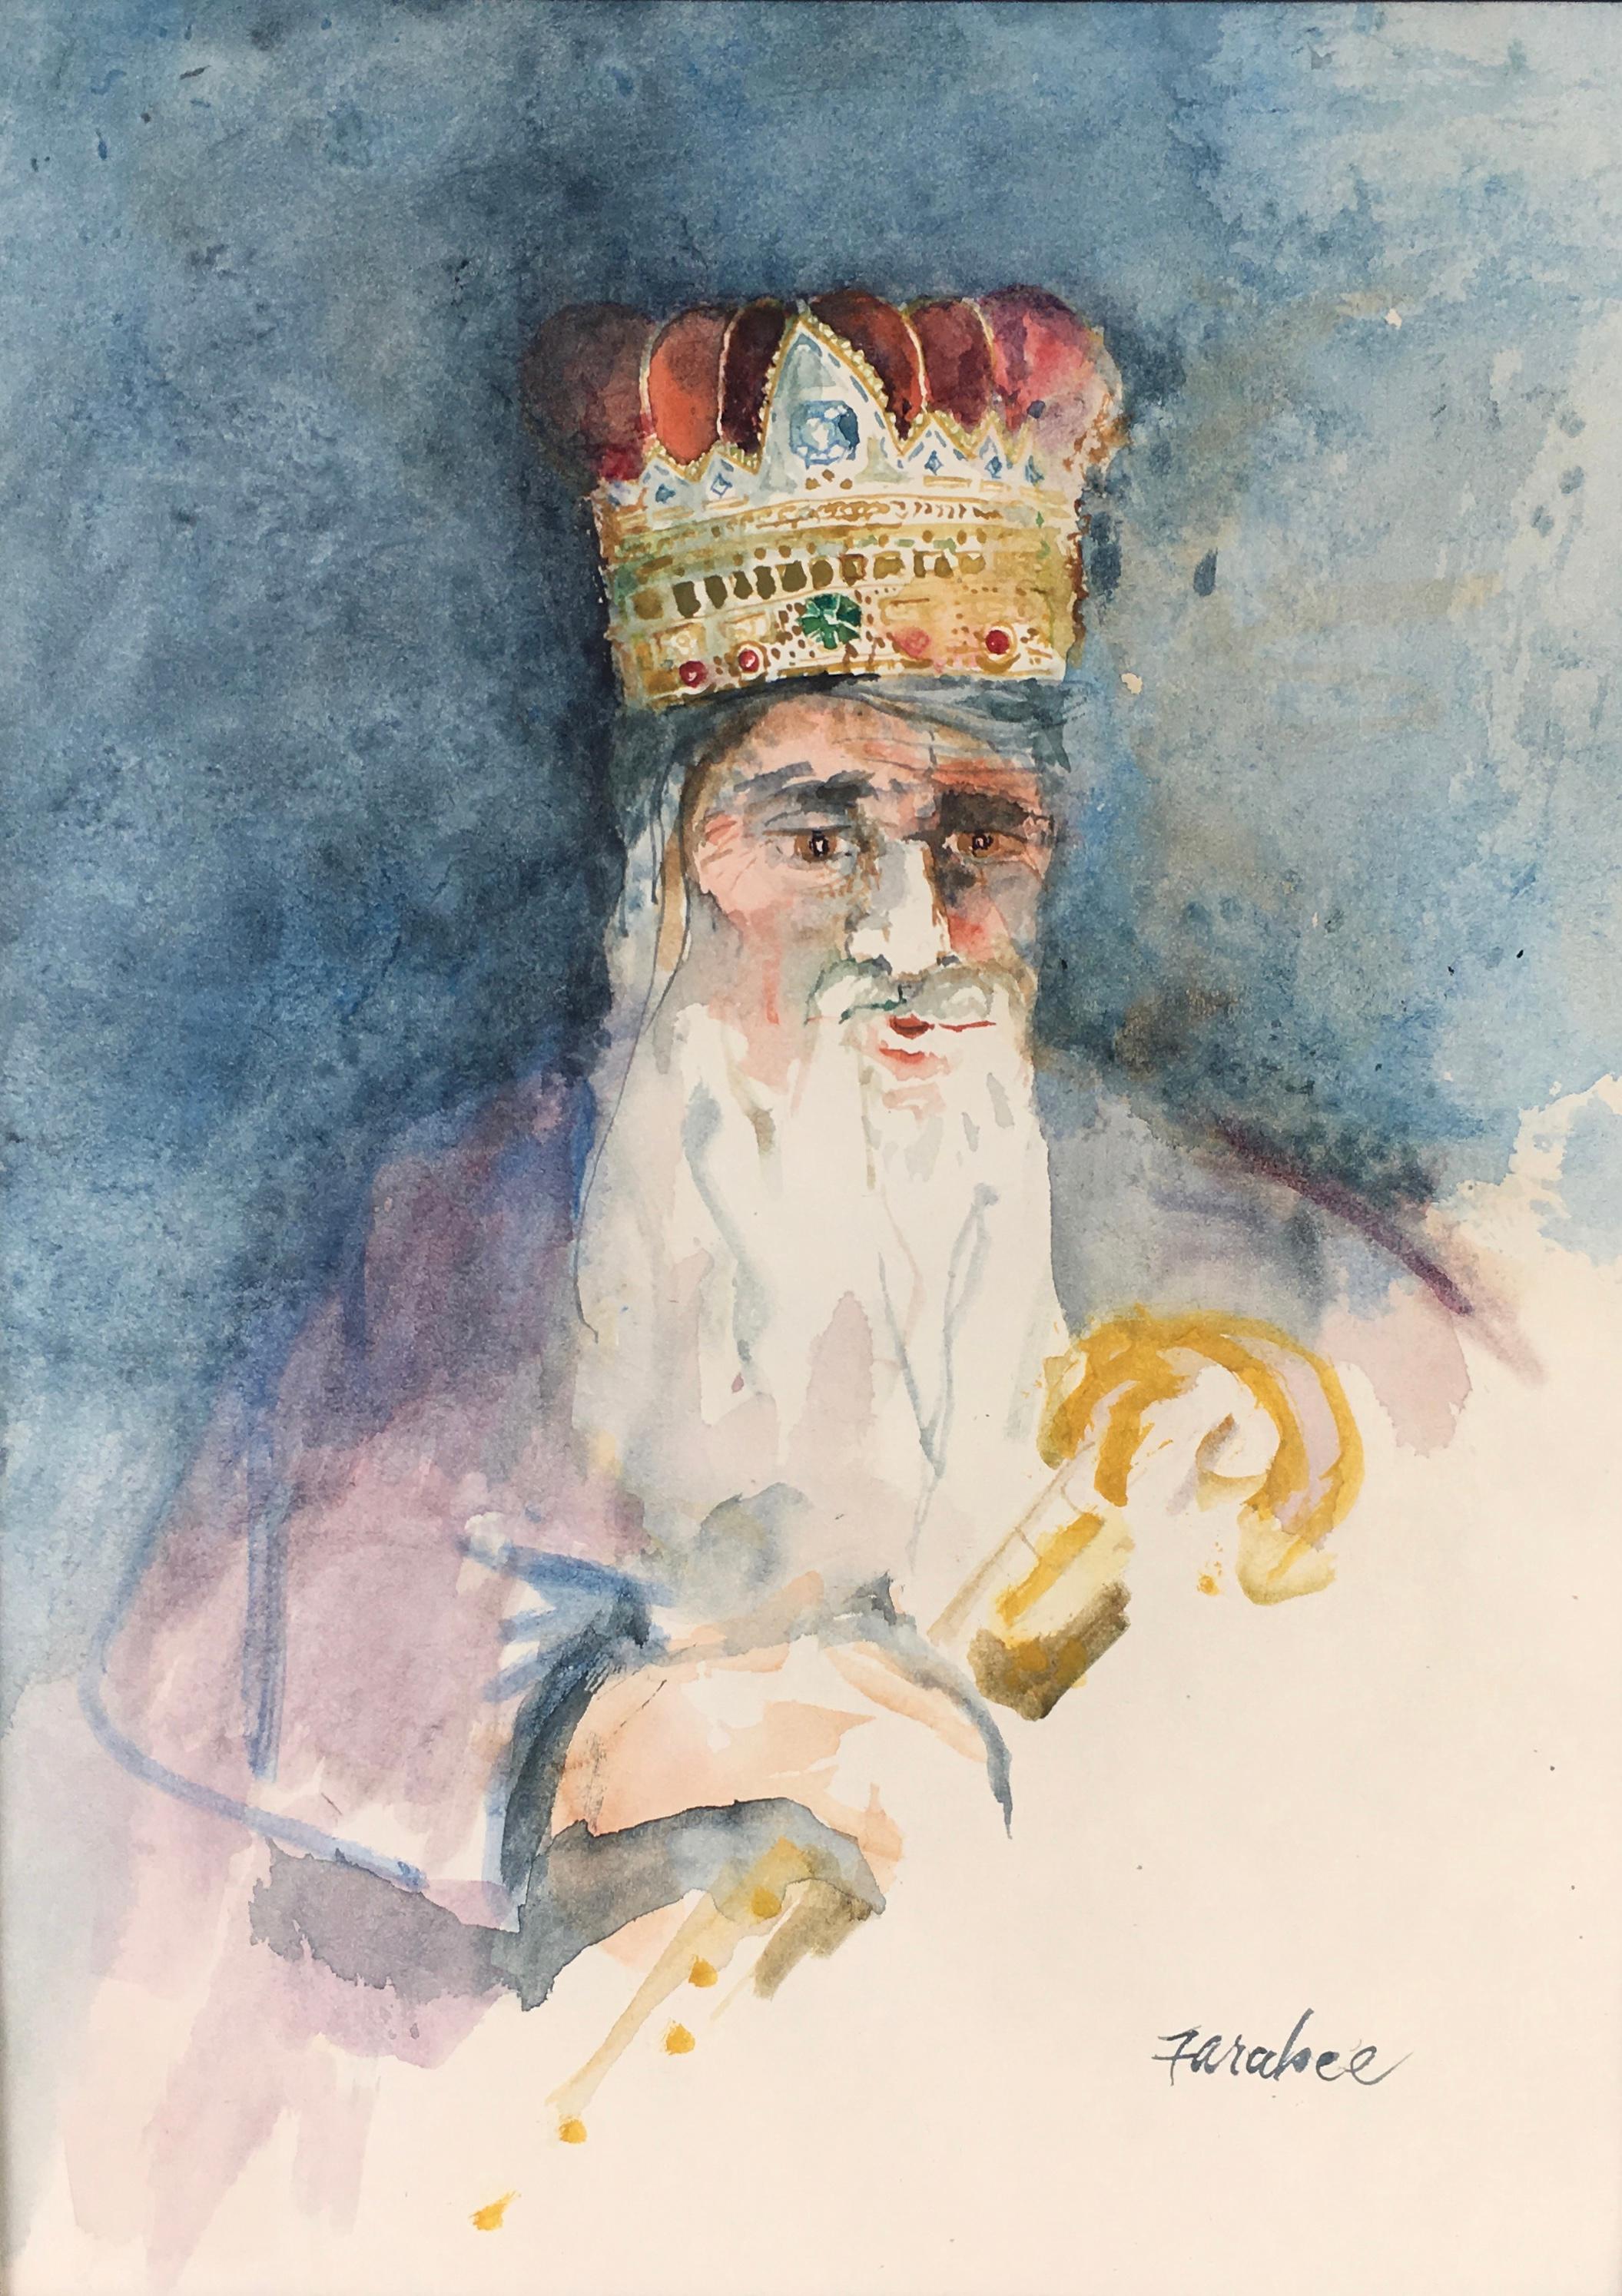 Your Majesty - Mixed Media Art by Ralph Farabee